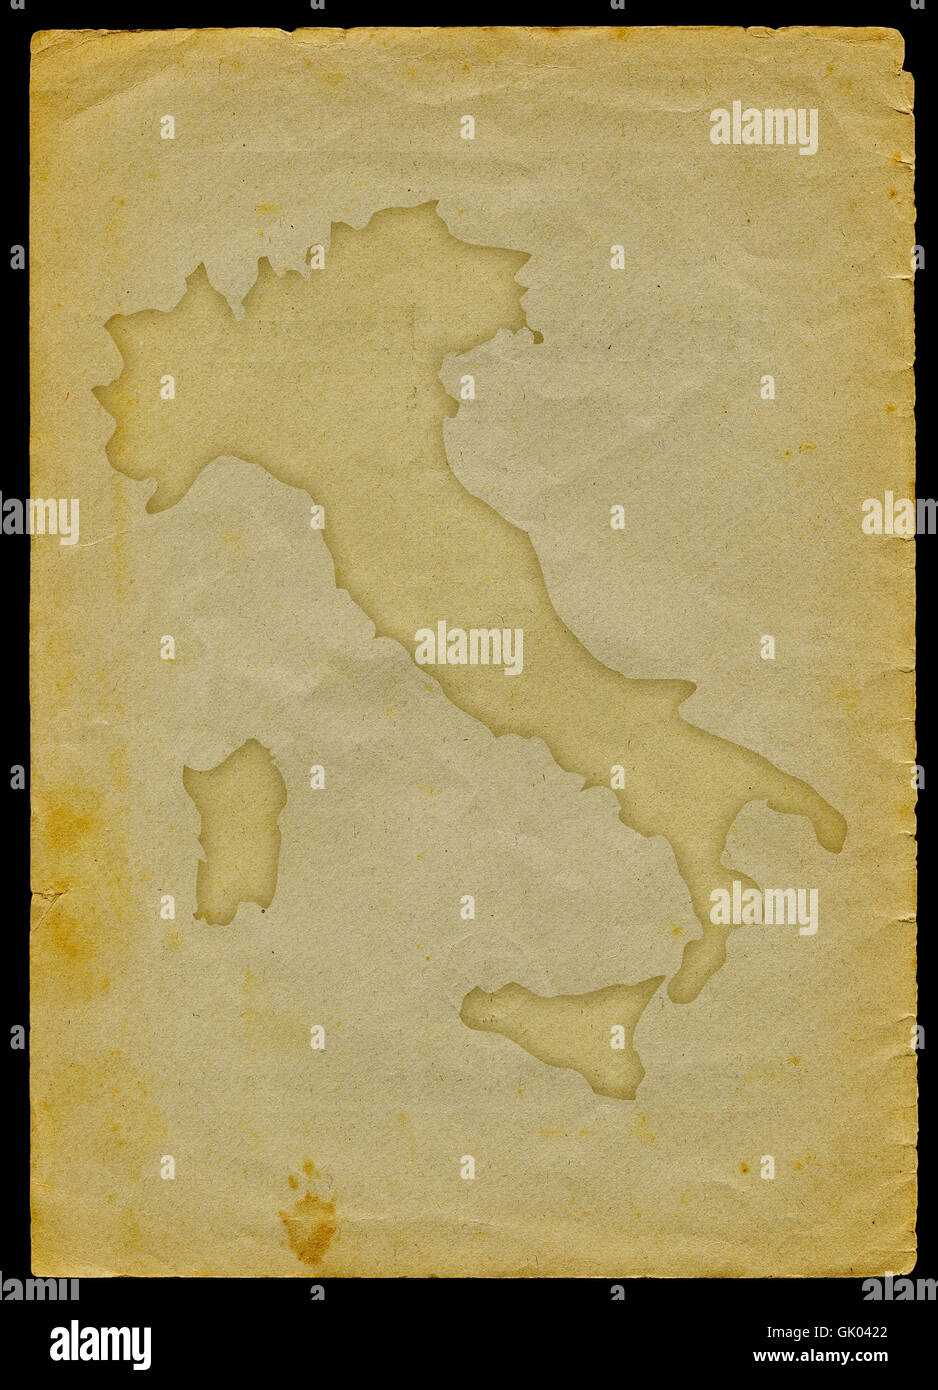 Italy map on old paper Stock Photo